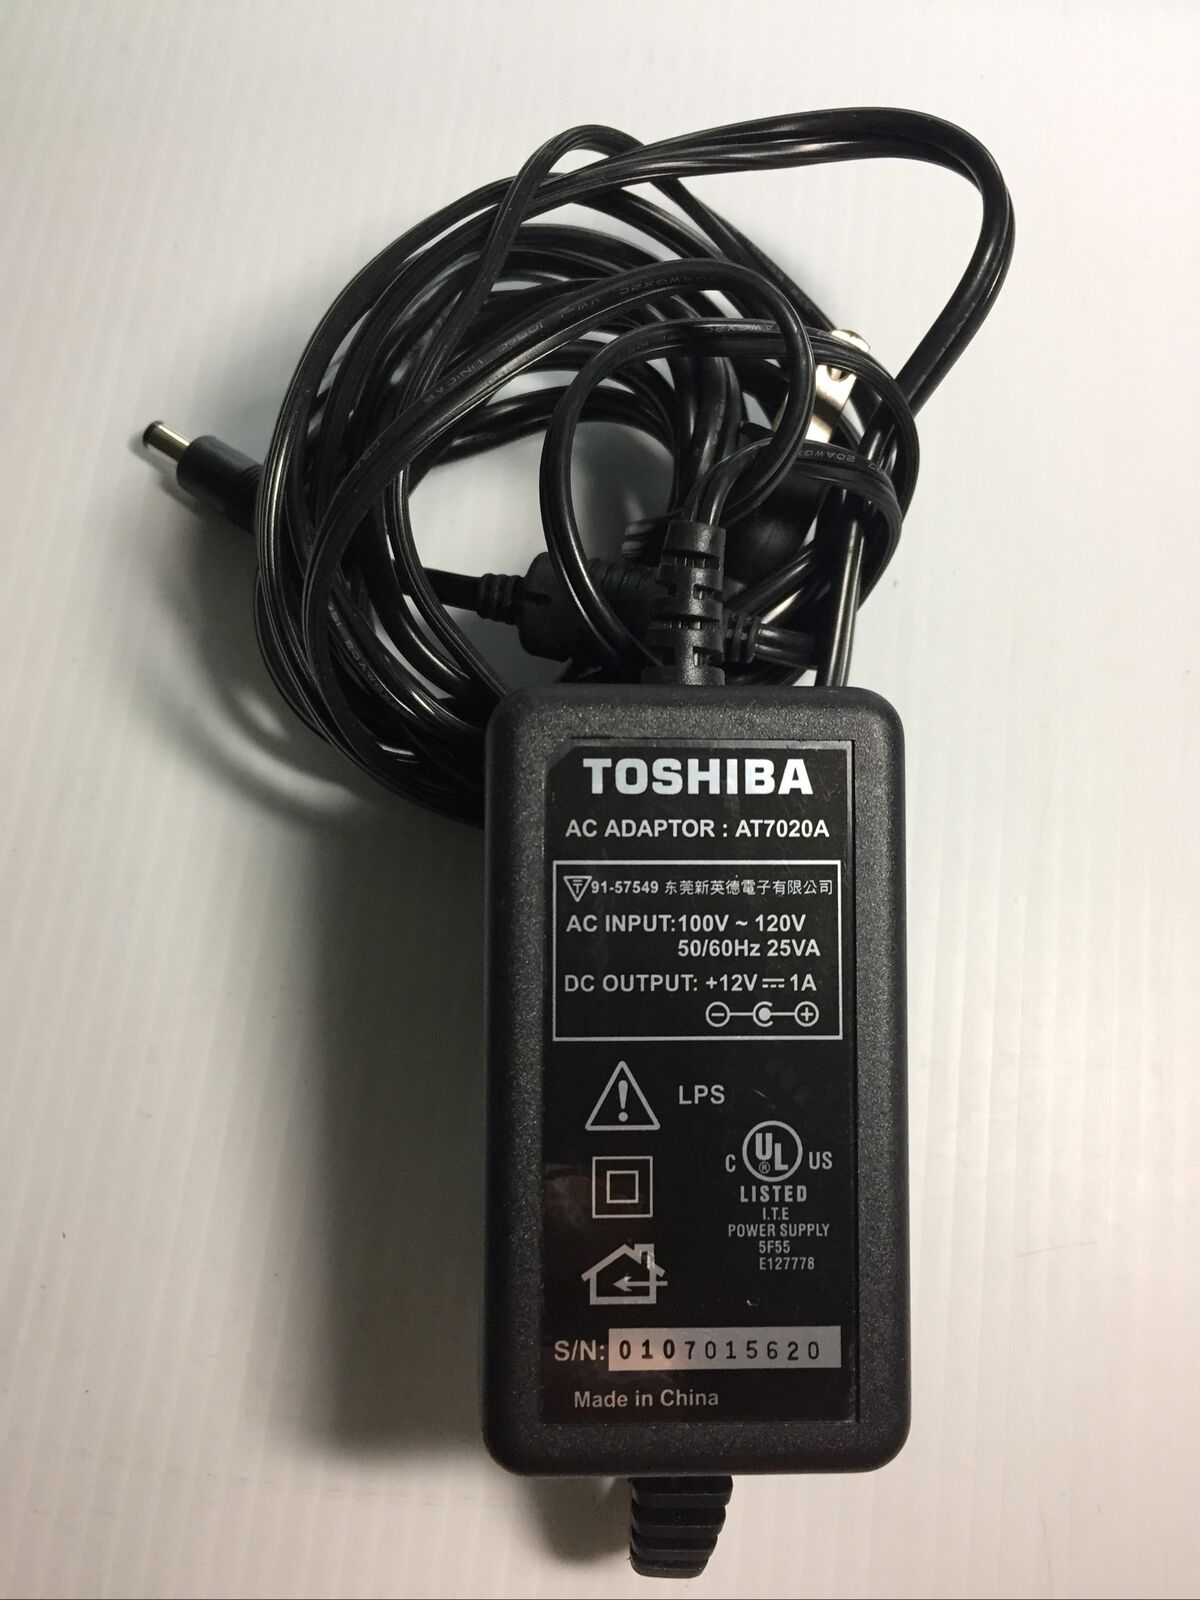 Original Toshiba AT7020A AC Adapter DC 12V 1A Power Supply Cord Charger